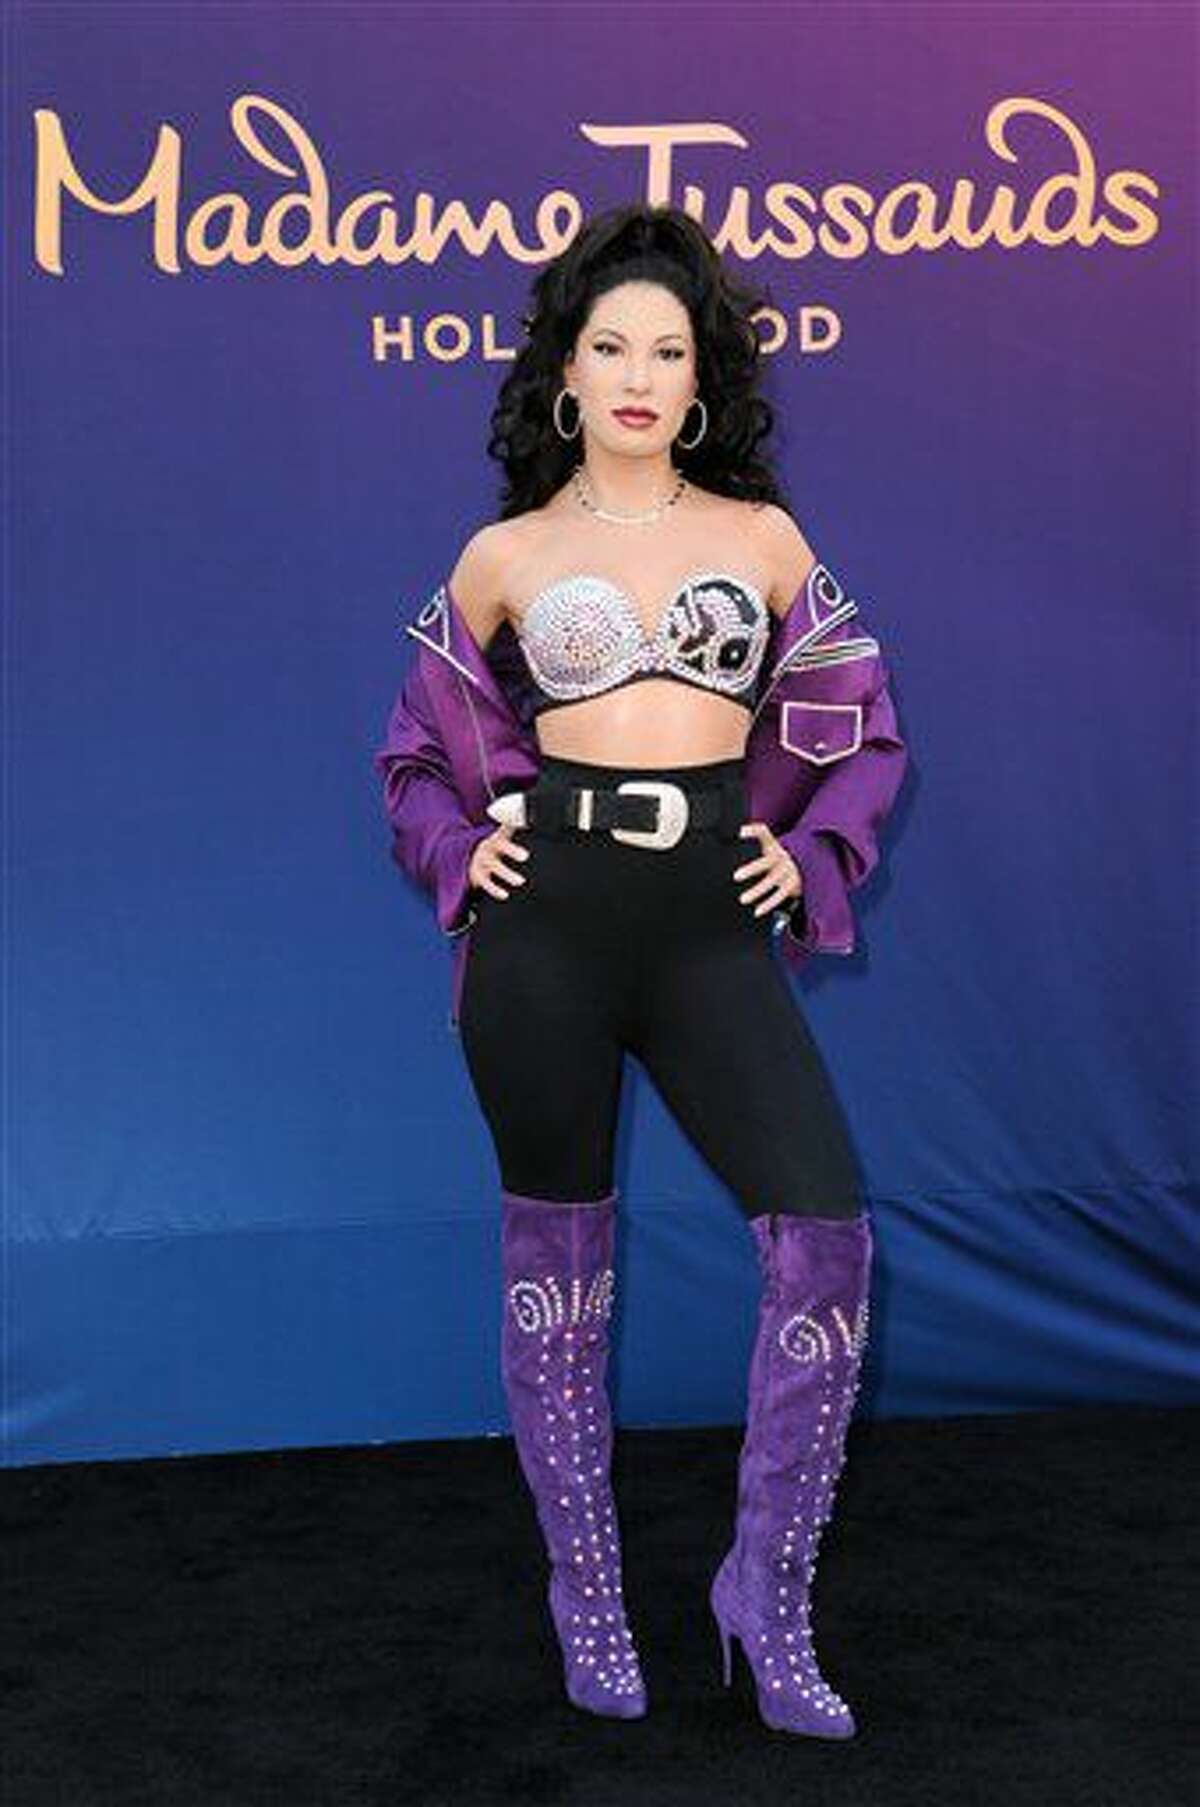 A wax figure of Selena Quintanilla is unveiled at Madame Tussauds Hollywood on Tuesday, Aug. 30, 2016, in Los Angeles. (Photo by Richard Shotwell/Invision/AP)